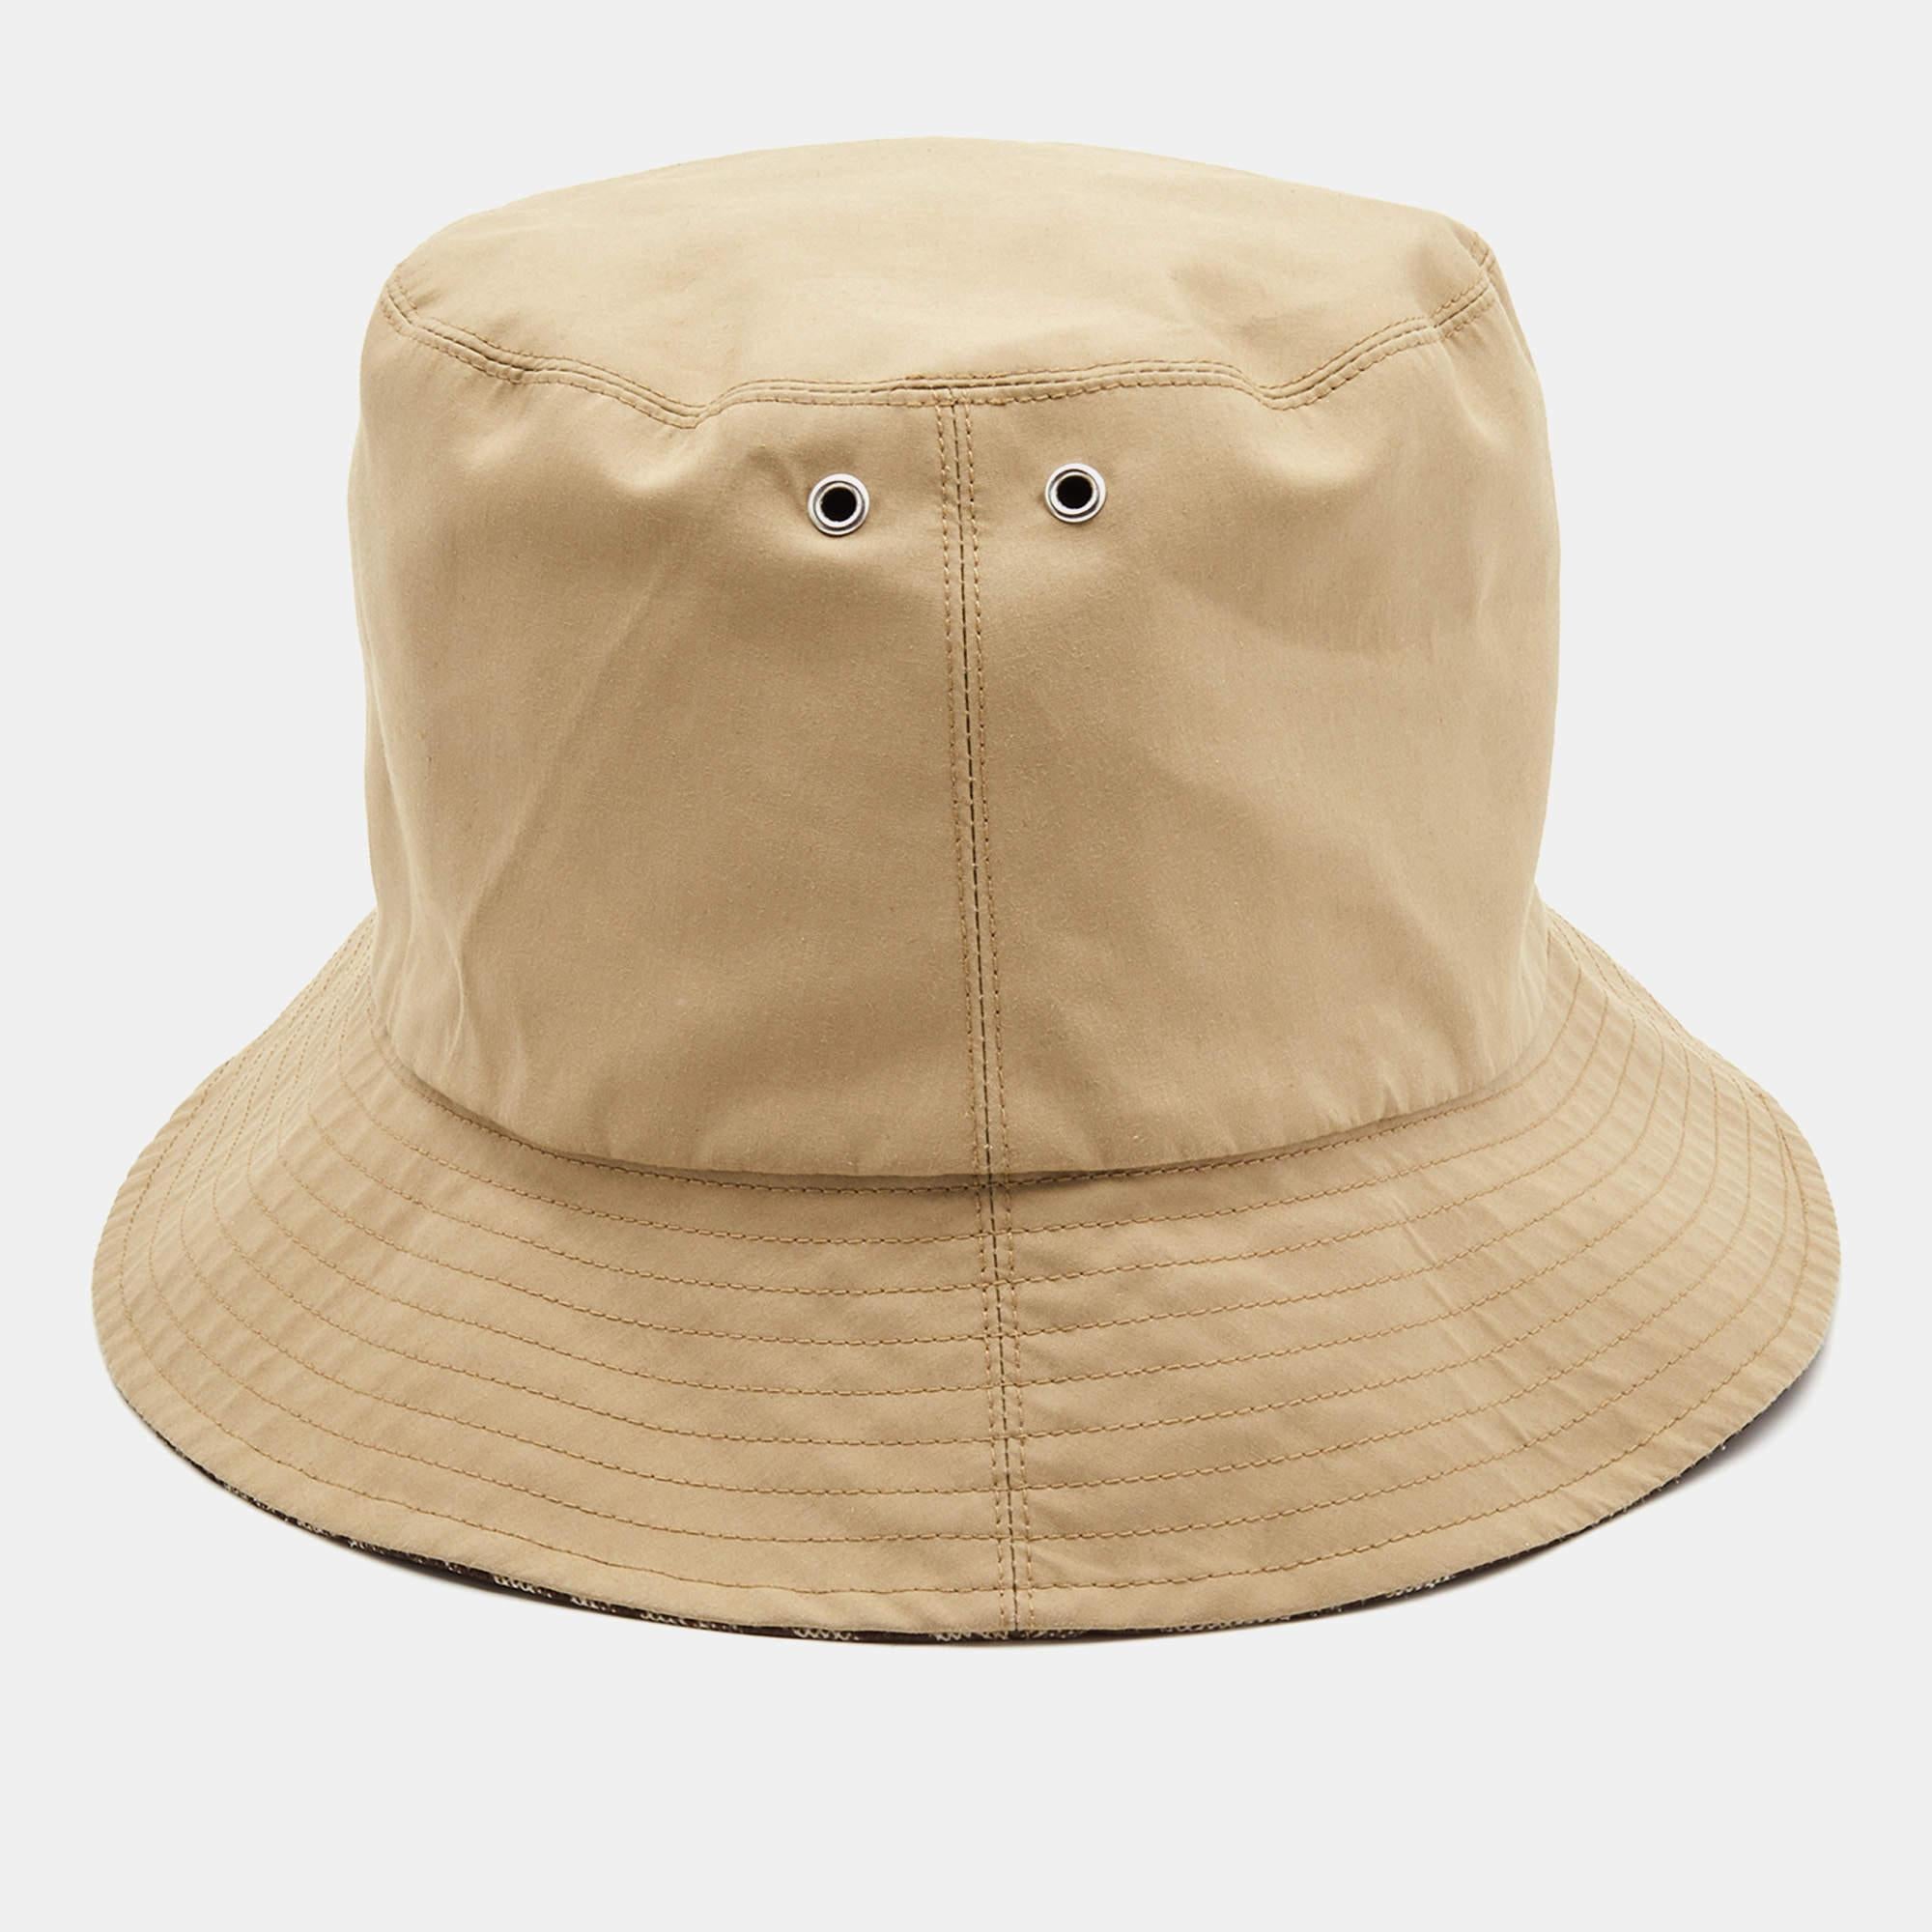 The Dior Teddy-D bucket hat is a stylish and versatile accessory. Its iconic oblique pattern and teddy bear motif showcase Dior's elegance. The hat is reversible, featuring a beige side and a brown side, allowing for multiple looks. The brim